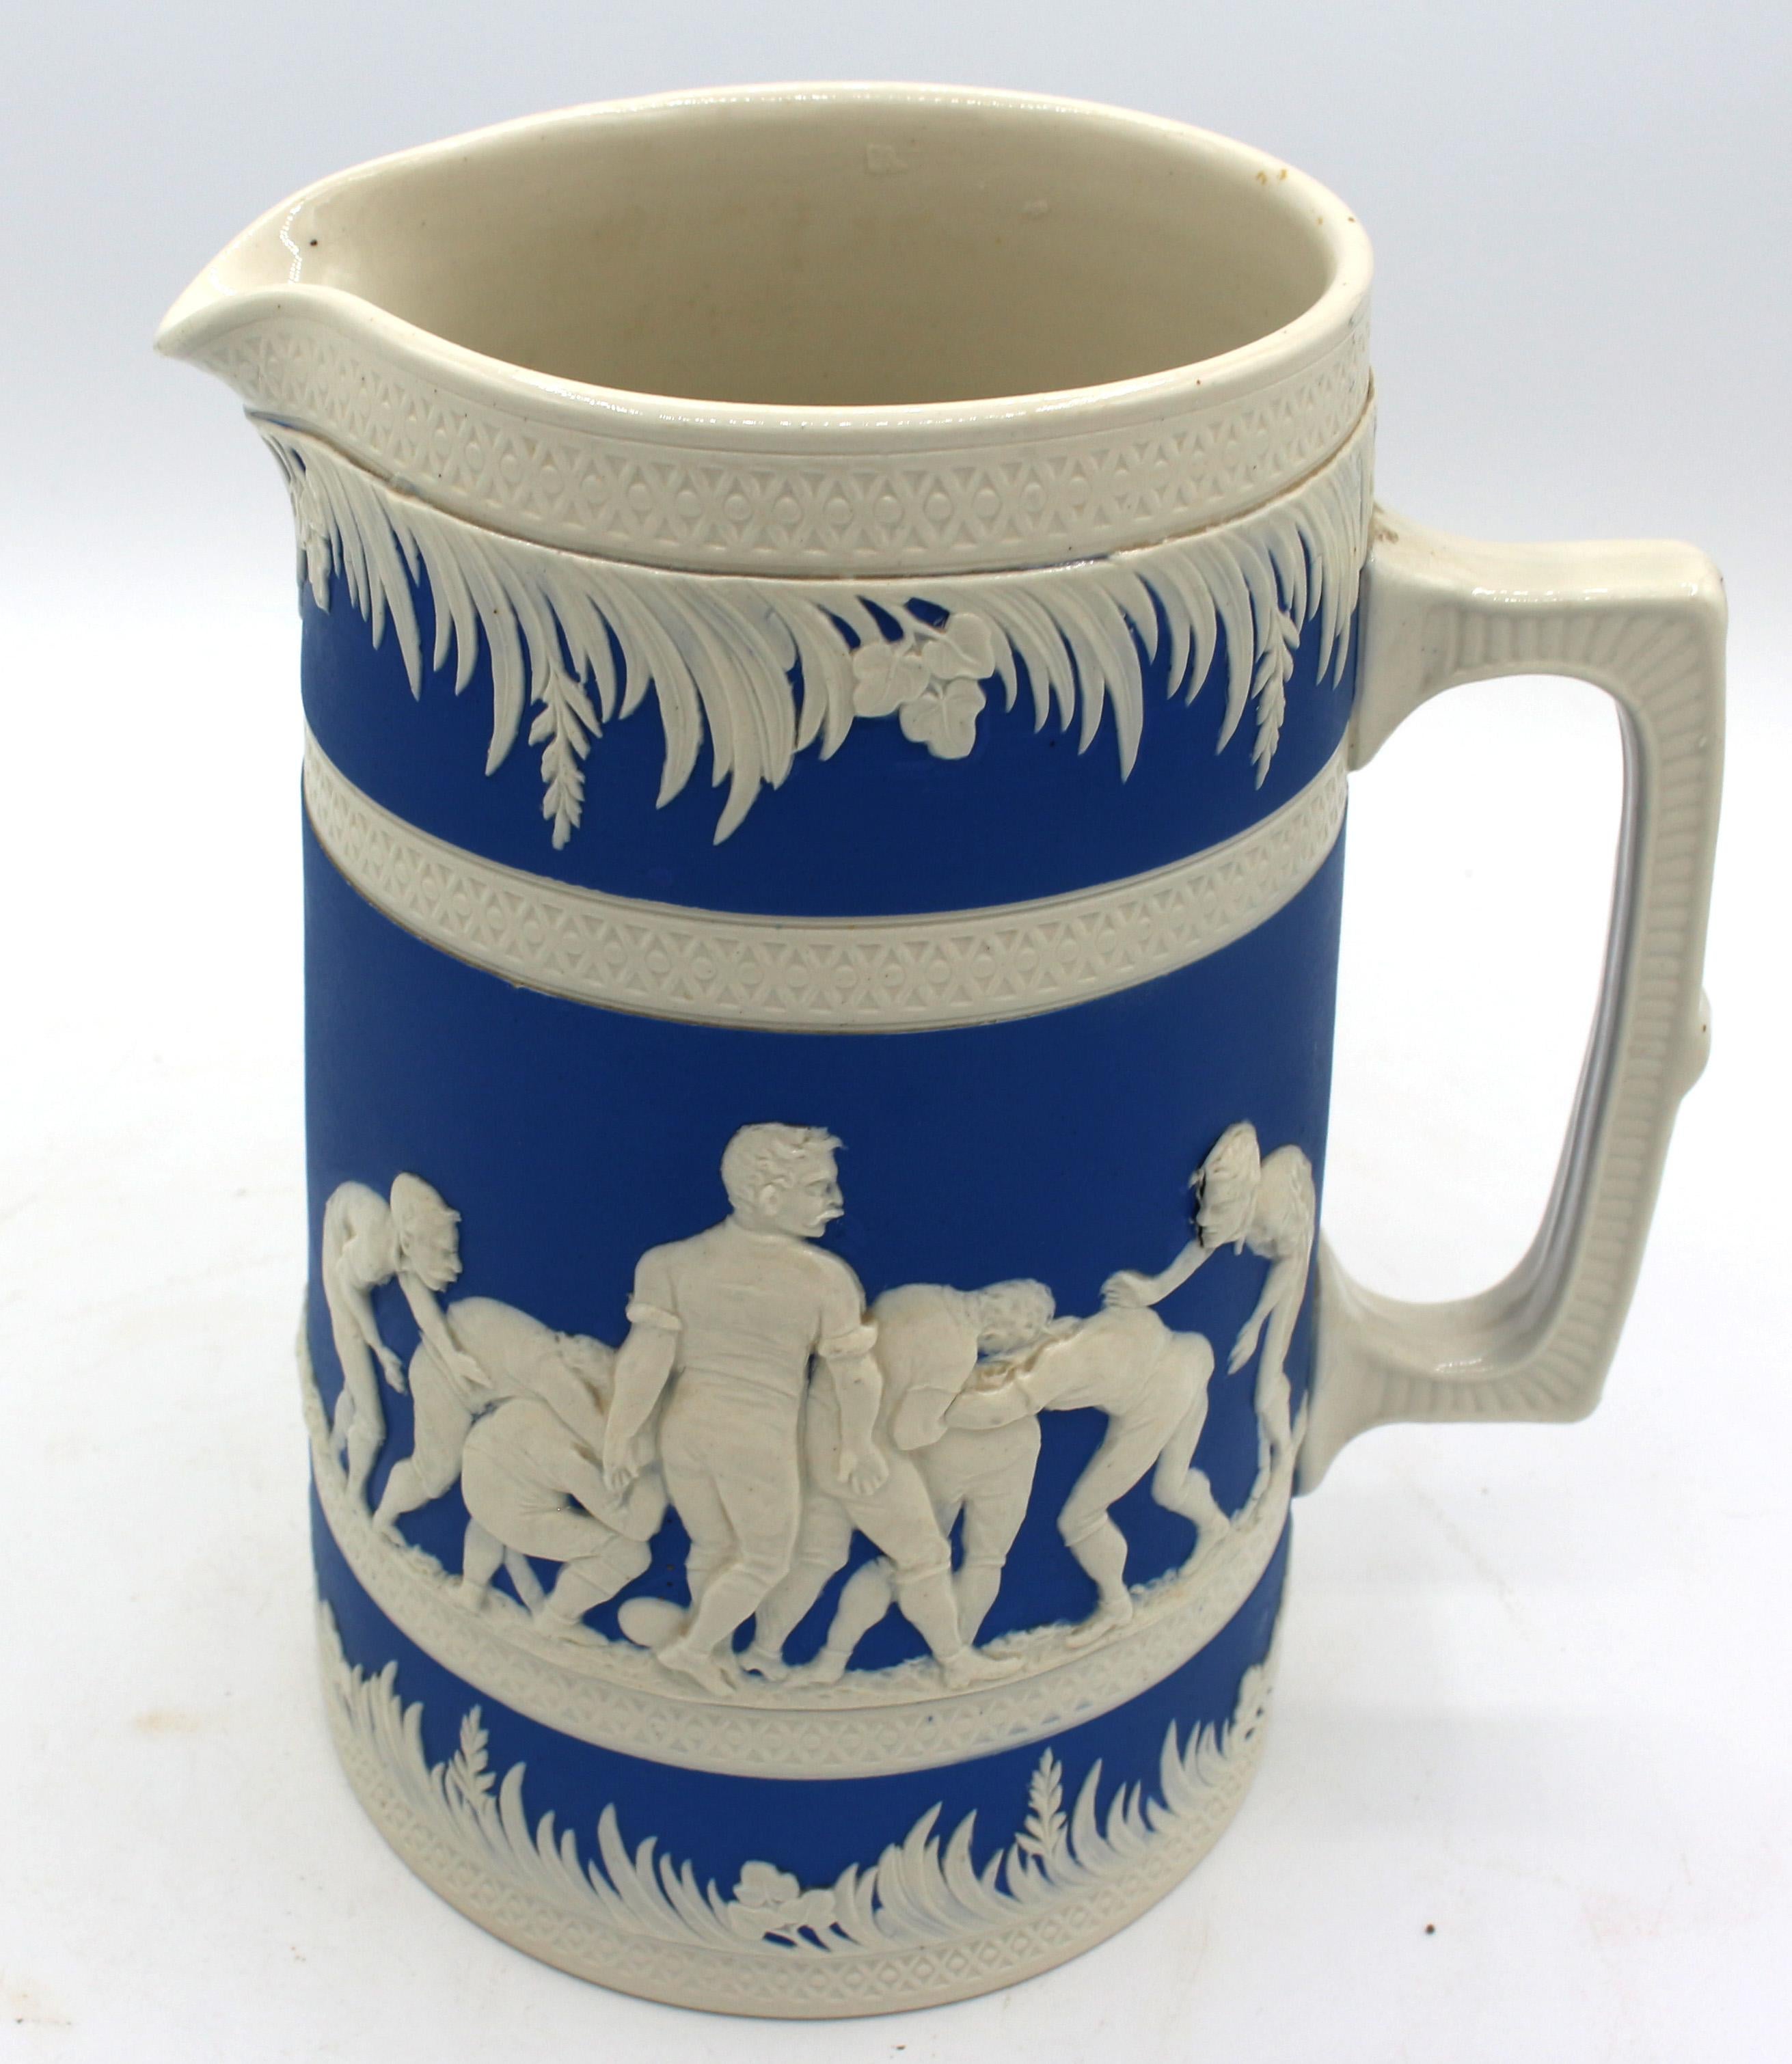 Marked 1895 American Football motif ceramic pitcher by Copeland for Jones, McDuffee & Stratton, Boston. A rarely found American market piece - glazed & matte finished, creamy white on deep blue. Marked 1895, Football, Copyright, J McD & S